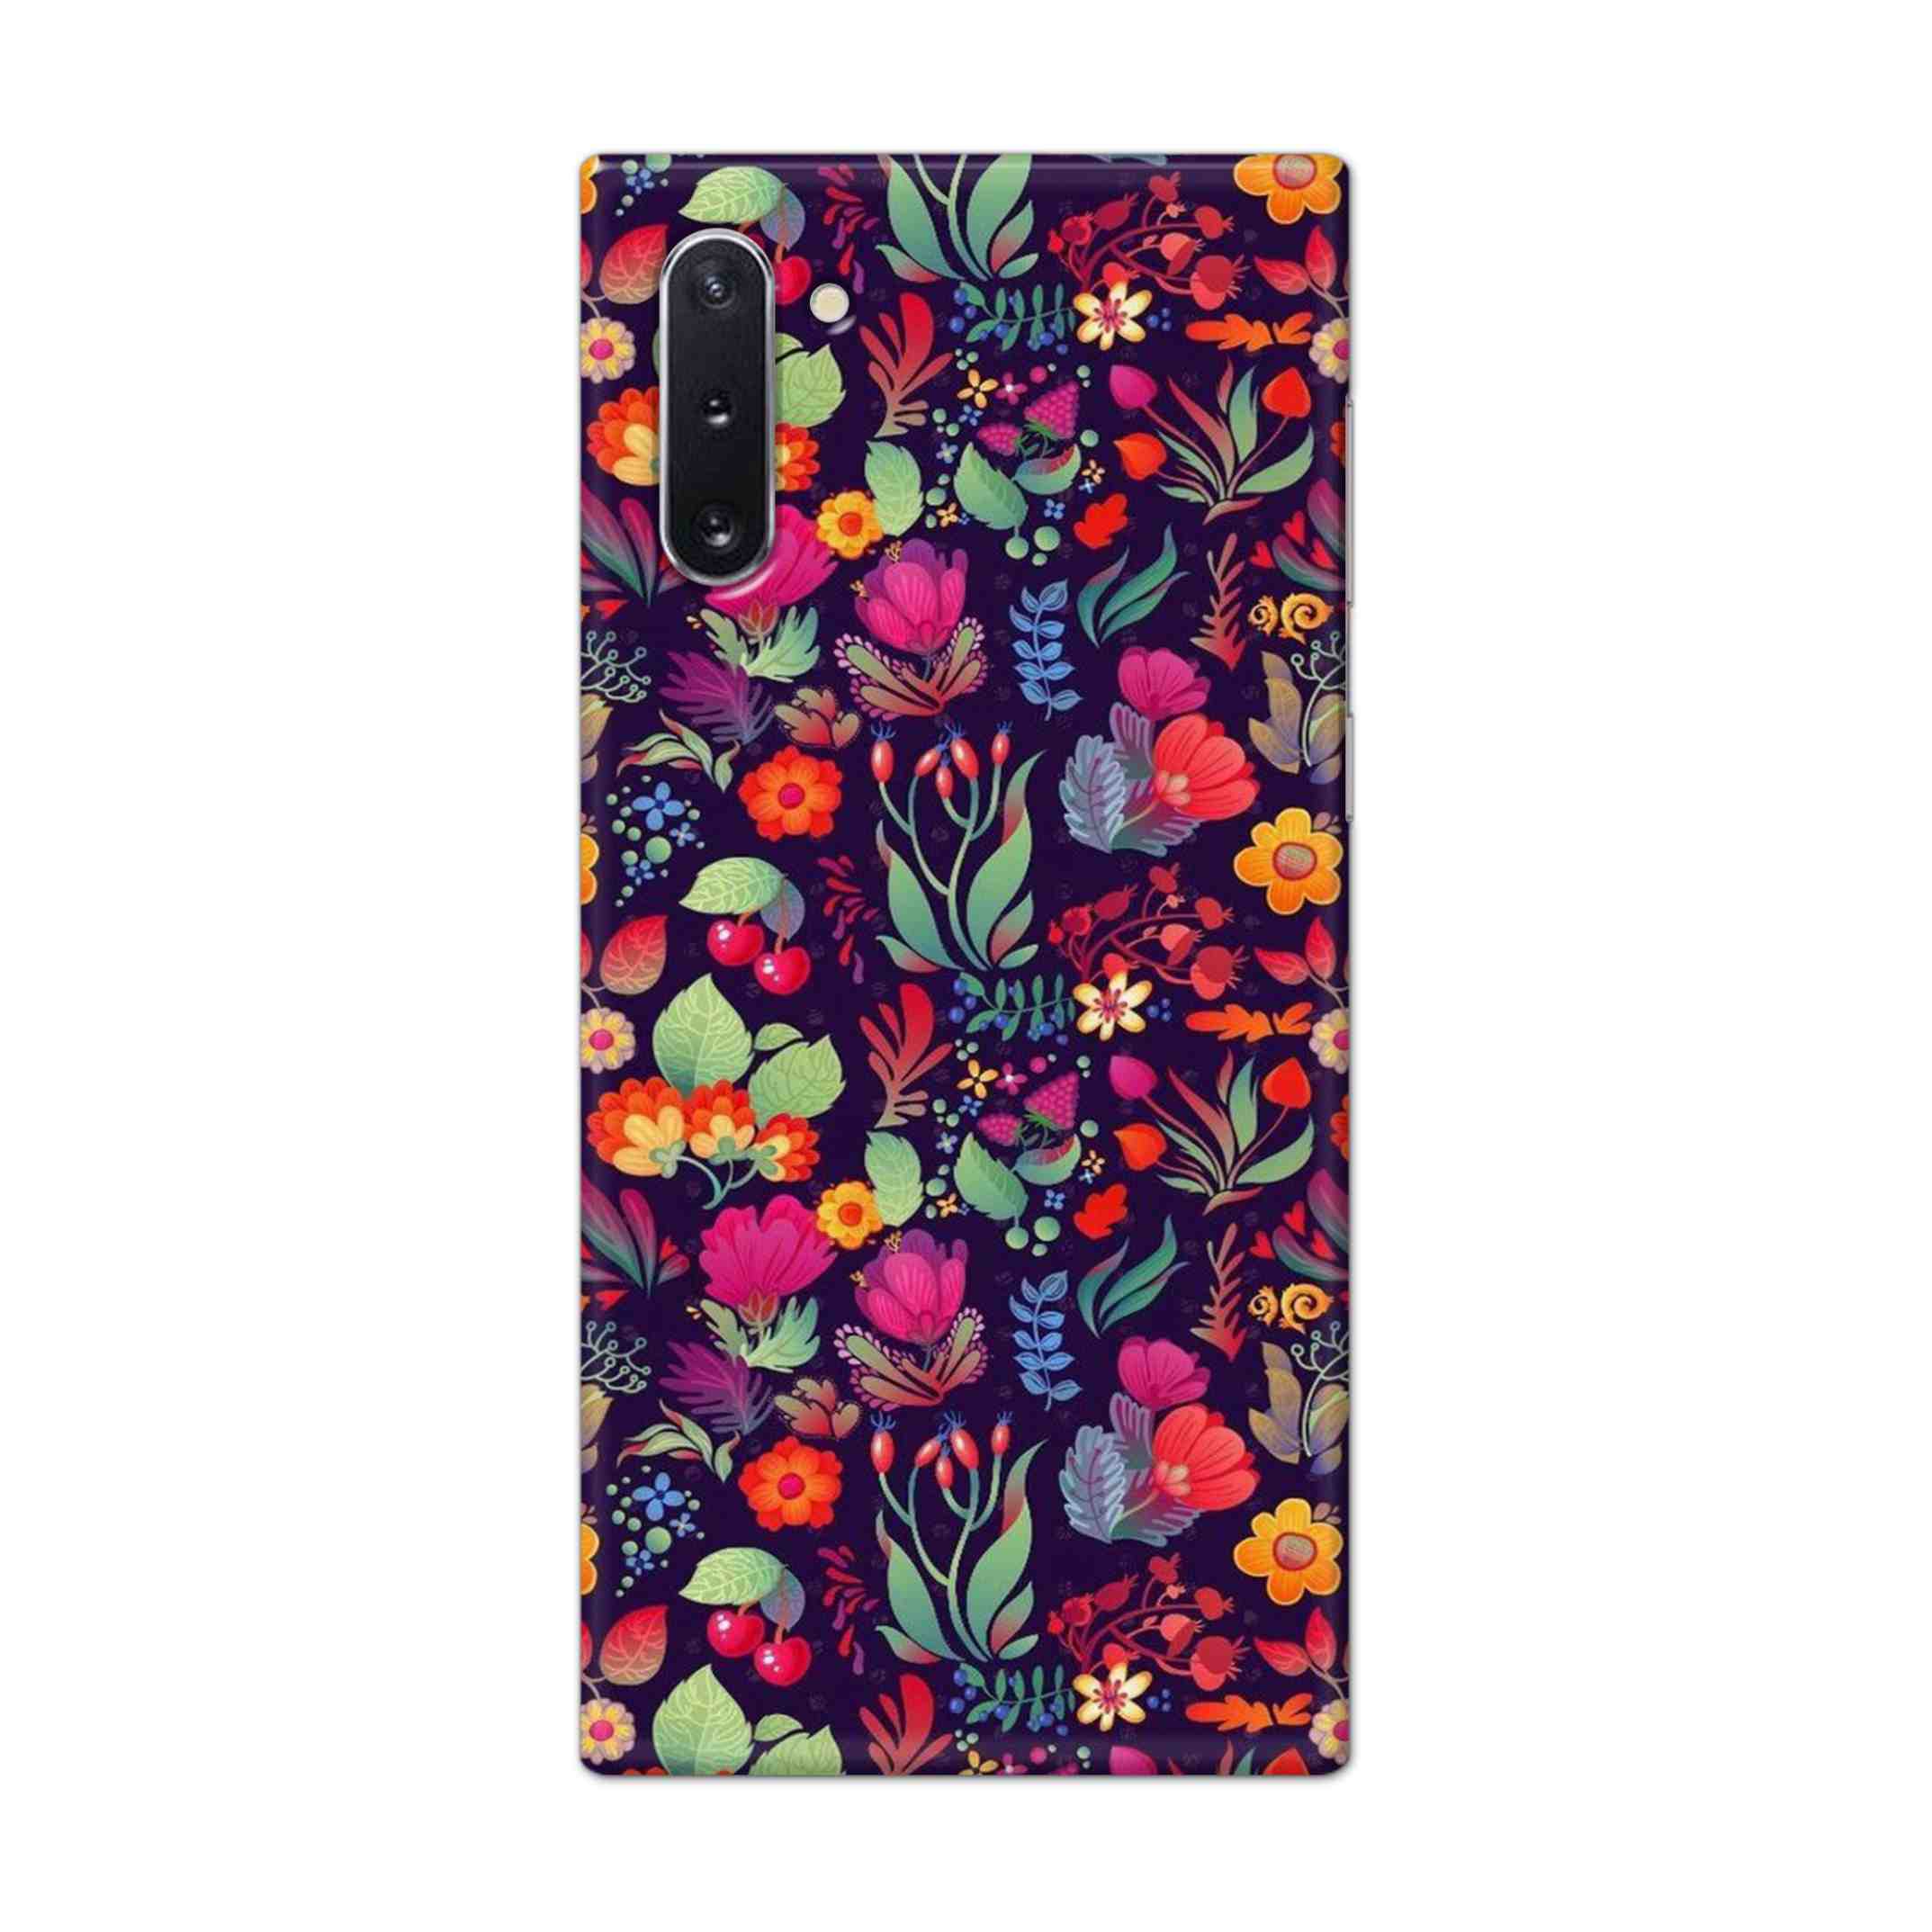 Buy Fruits Flower Hard Back Mobile Phone Case Cover For Samsung Galaxy Note 10 Online